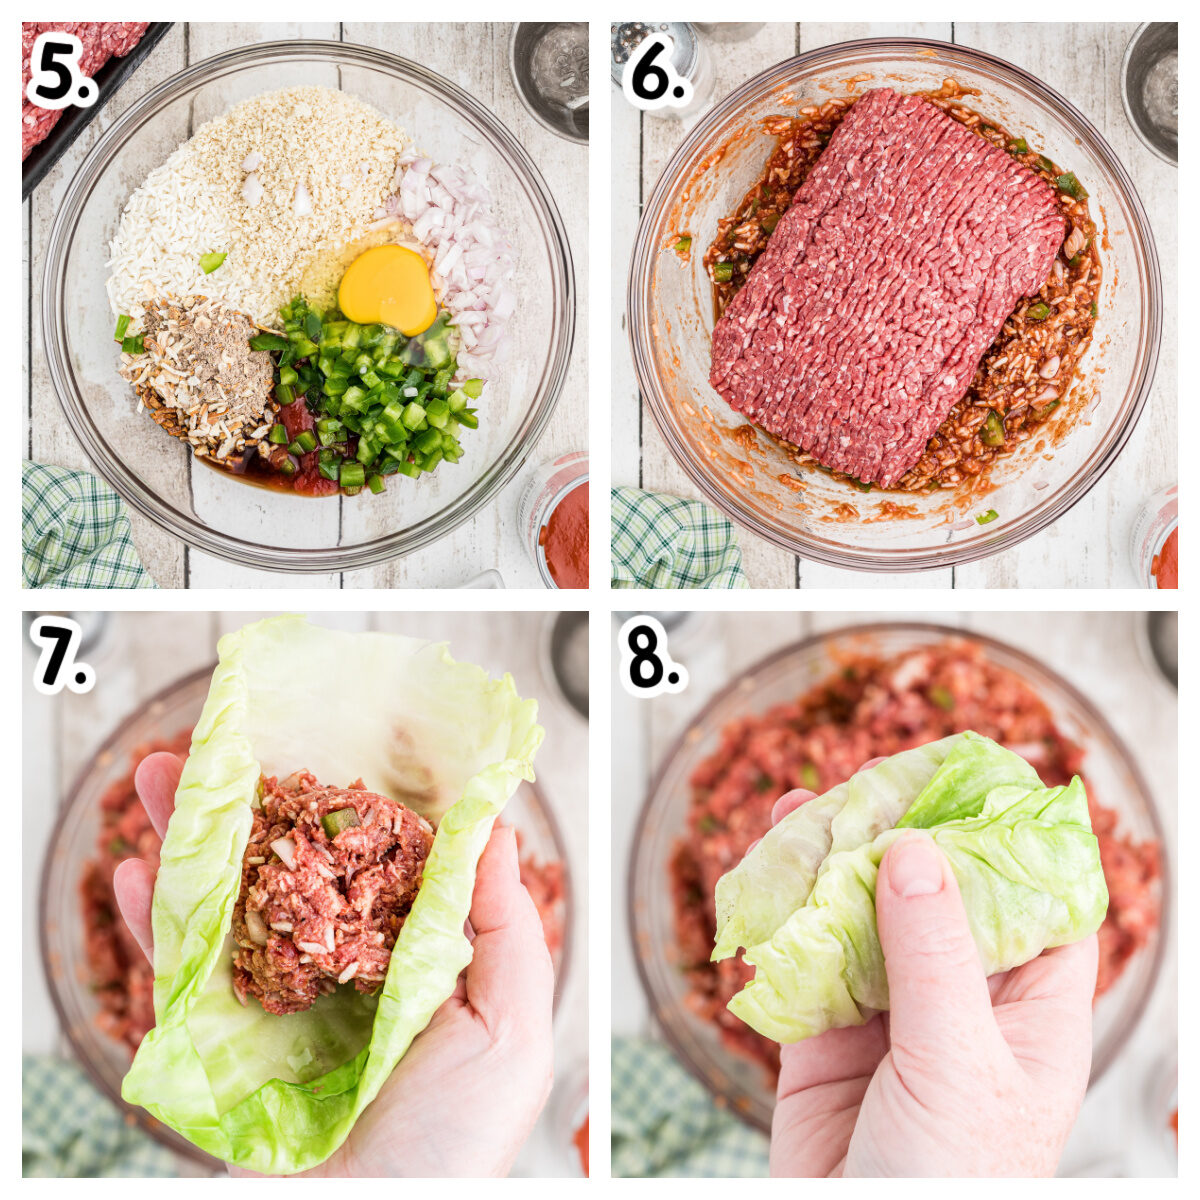 4 images showing how to make the filling for cabbage rolls.